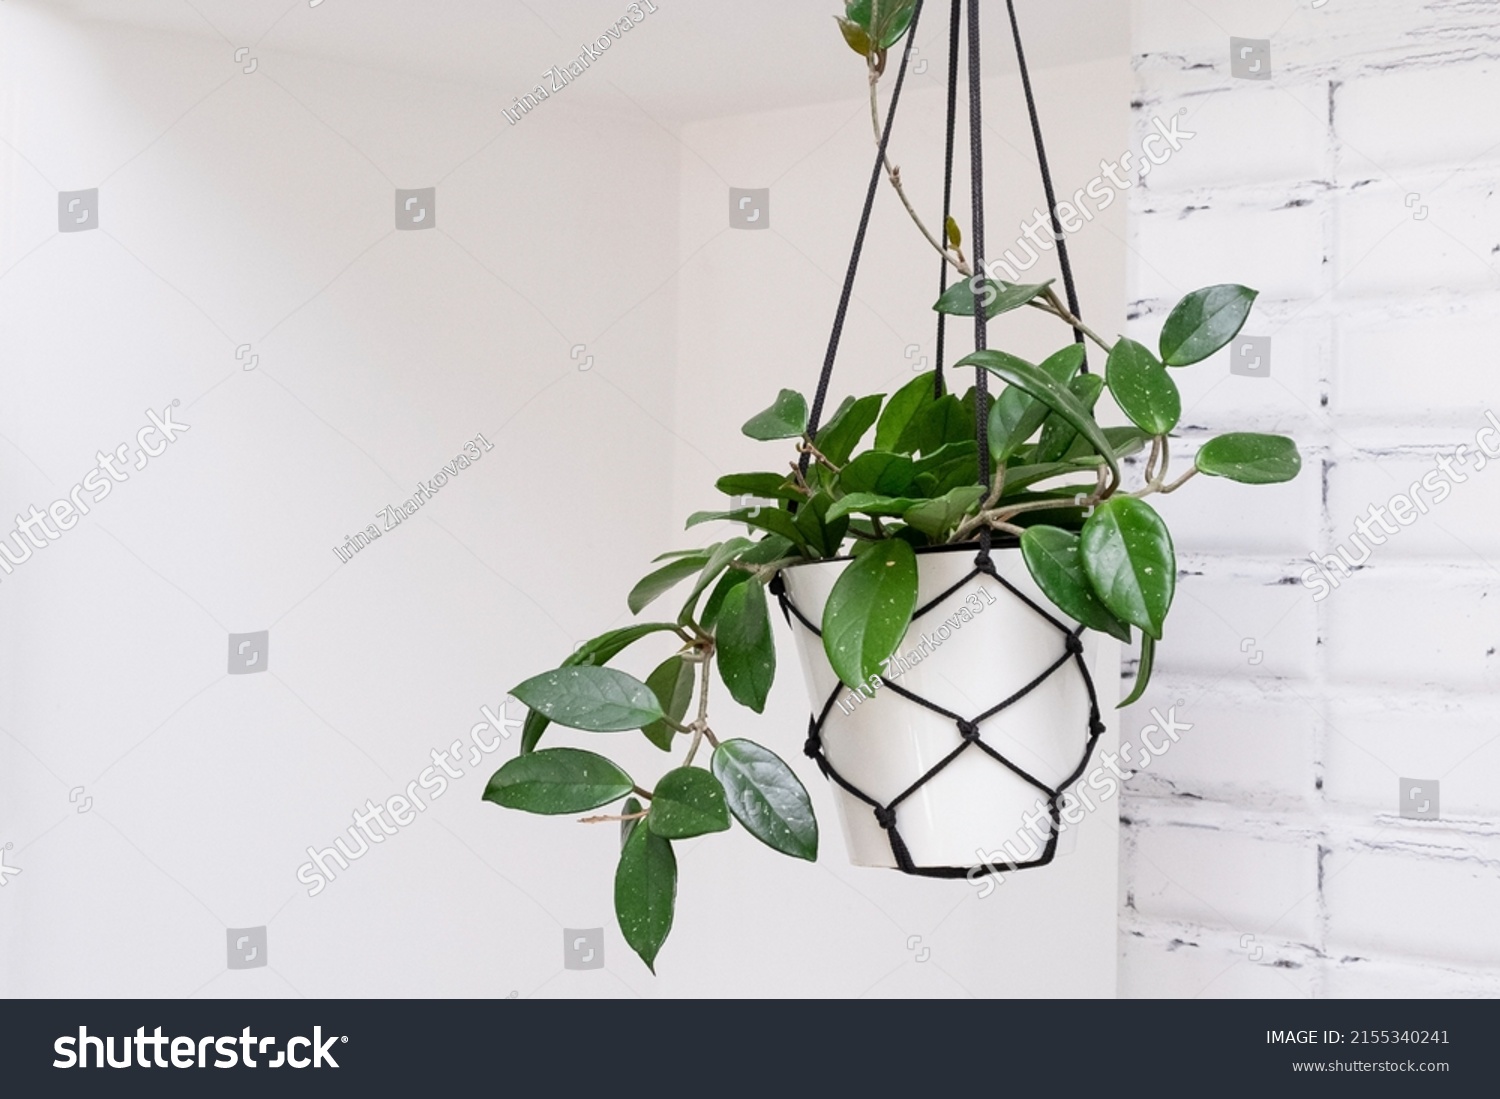 Hoya krohniana in a white pot in a wicker macrame planter hanging isolate on a white background. lacunosa heart leaf..Close-up of a plant. Waxy plant in a pot.Houseplant Hoya against a white wall.  #2155340241